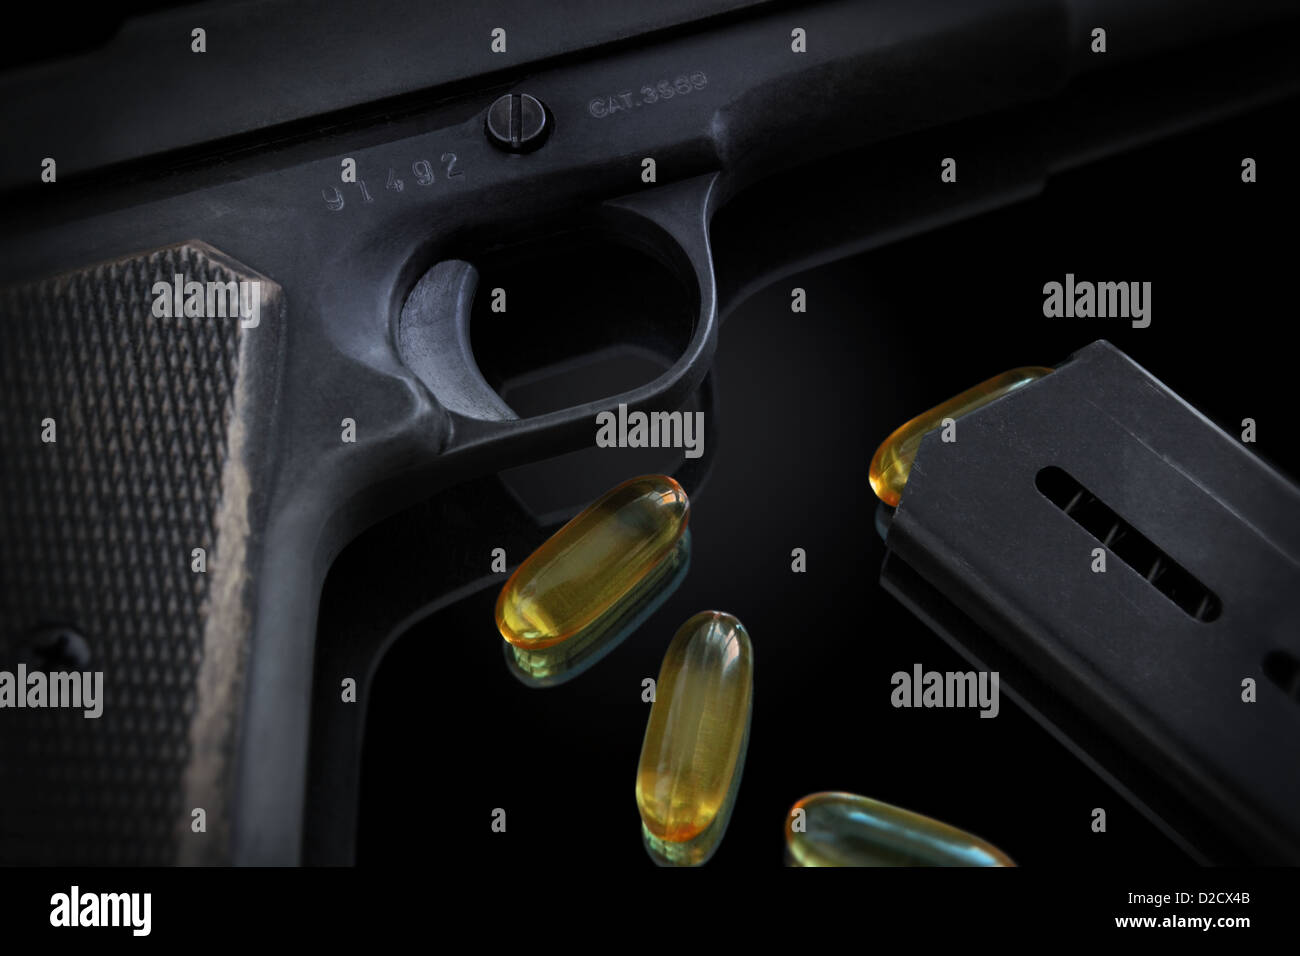 we see some details of a gun, the charger and some gel pills that are positioned to look like bullets. Low key. Stock Photo